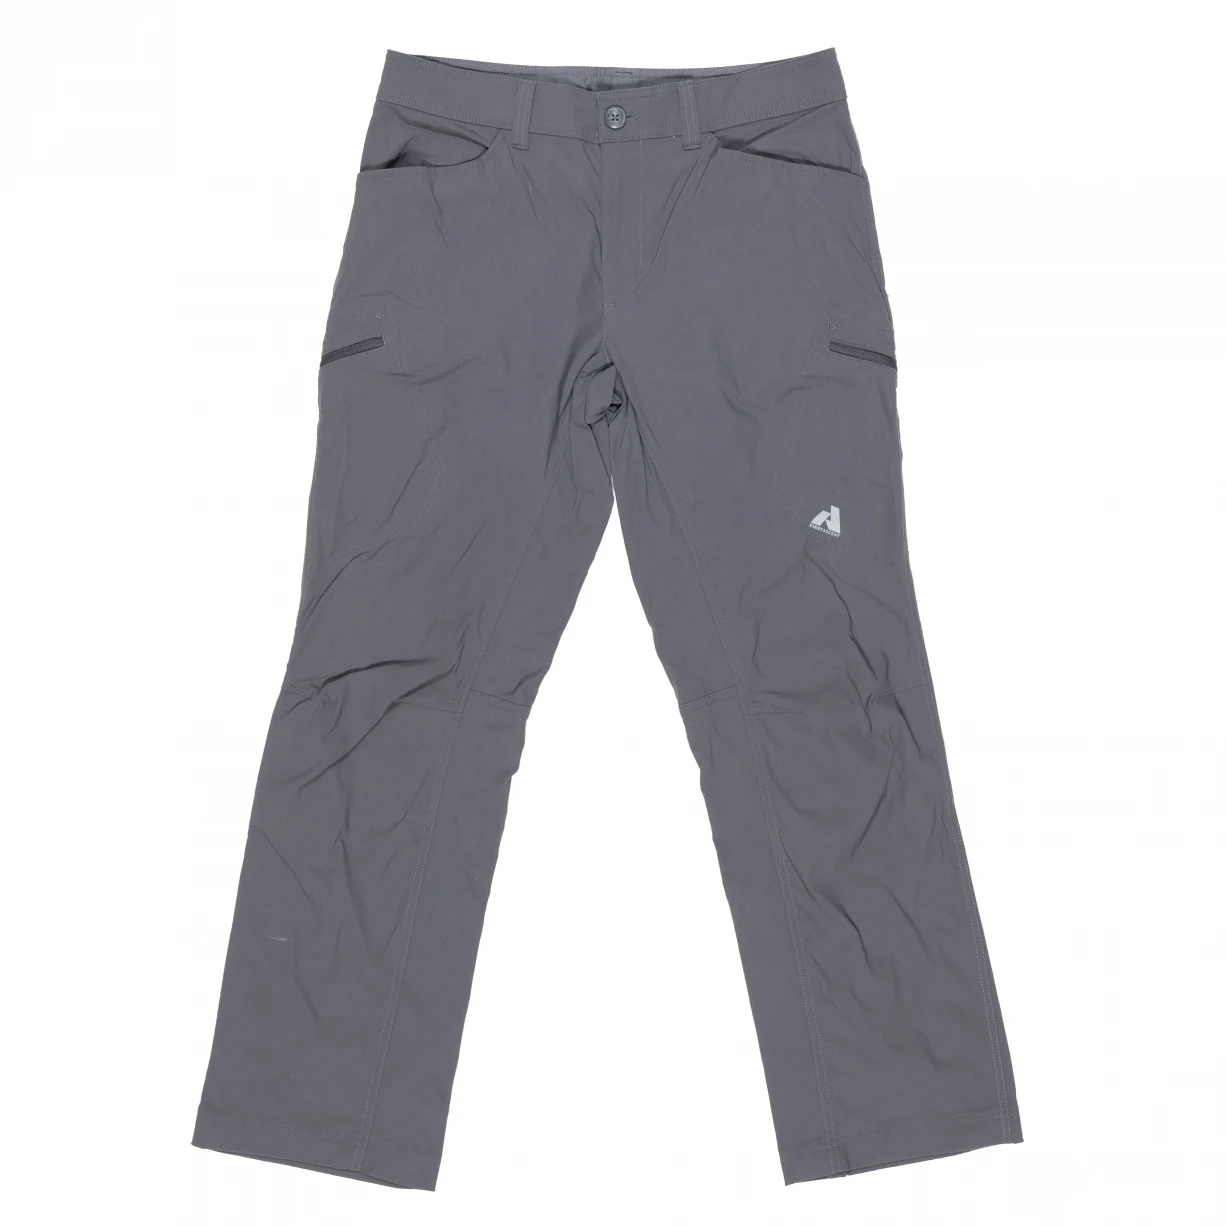 Item 908793 - Eddie Bauer Guide Pro Pants - Men's Hiking and